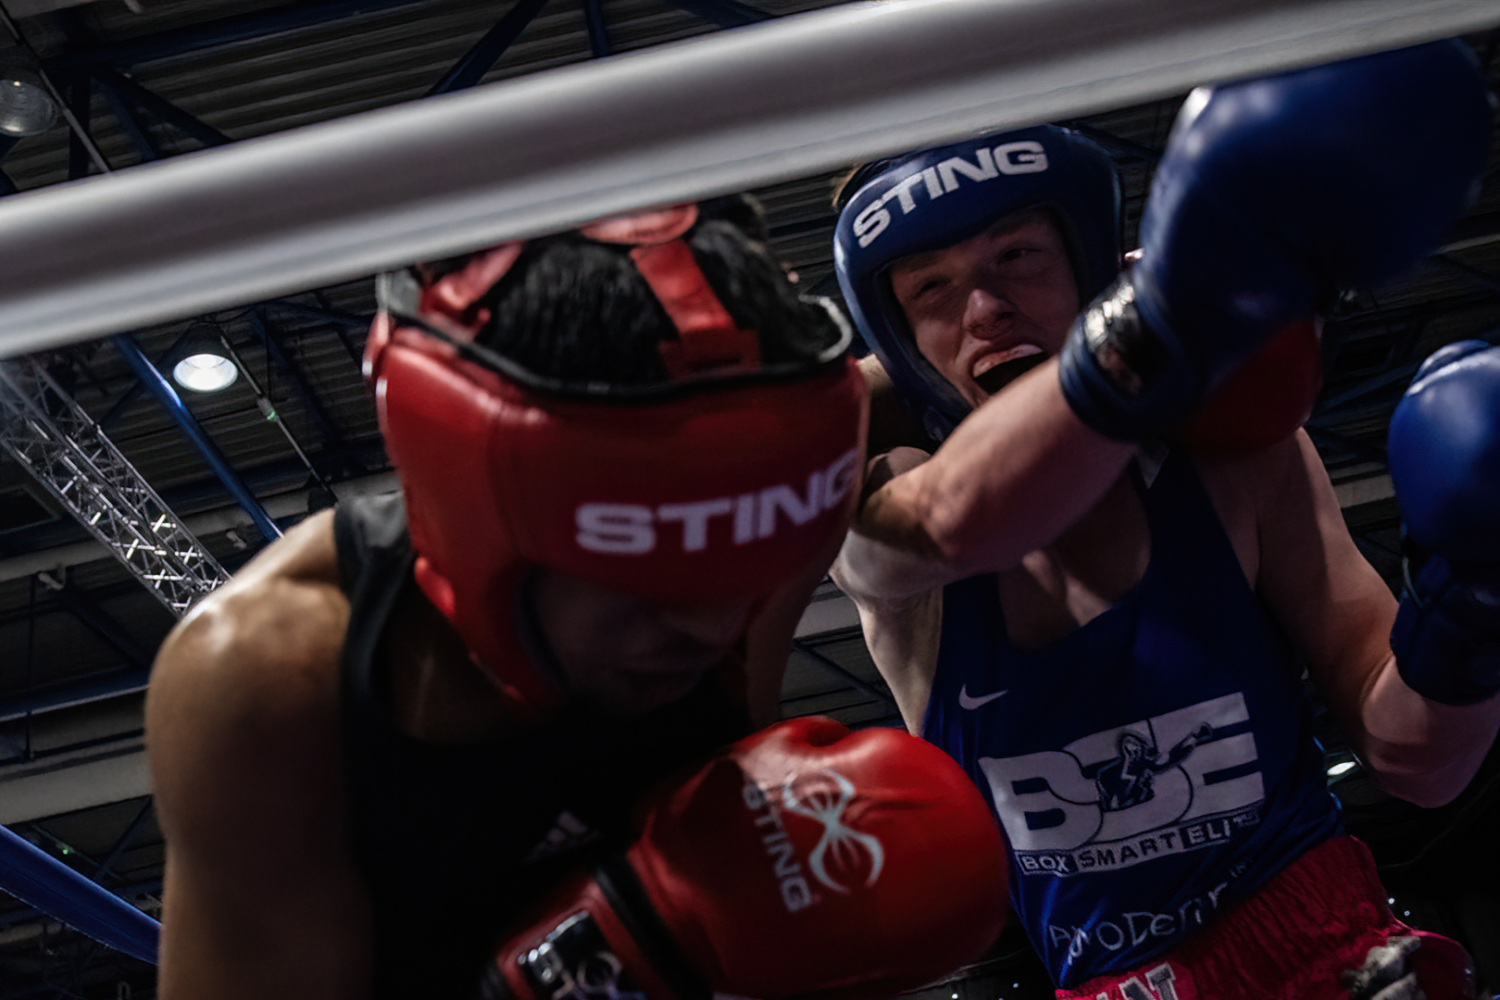 Youth Championships 2022: Finals Day round-up - England Boxing